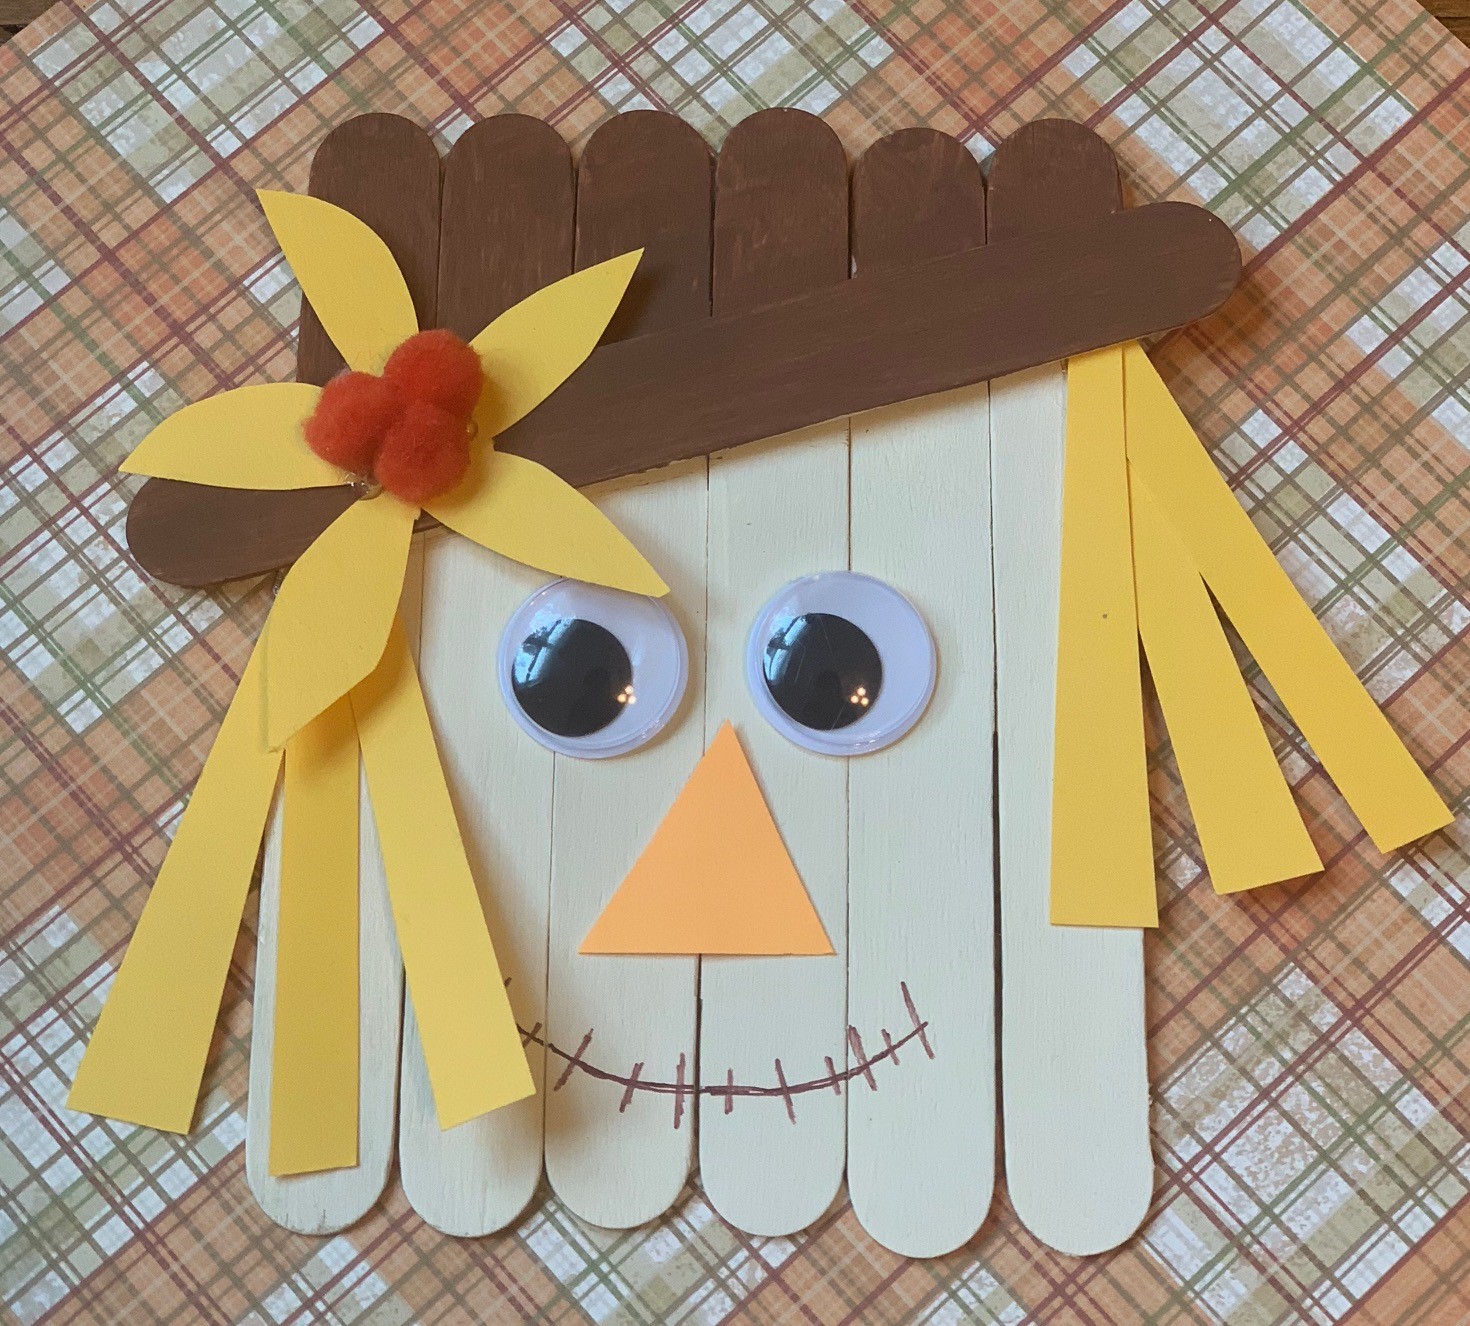 scarecrow made out of Popsicle sticks, paint, and paper